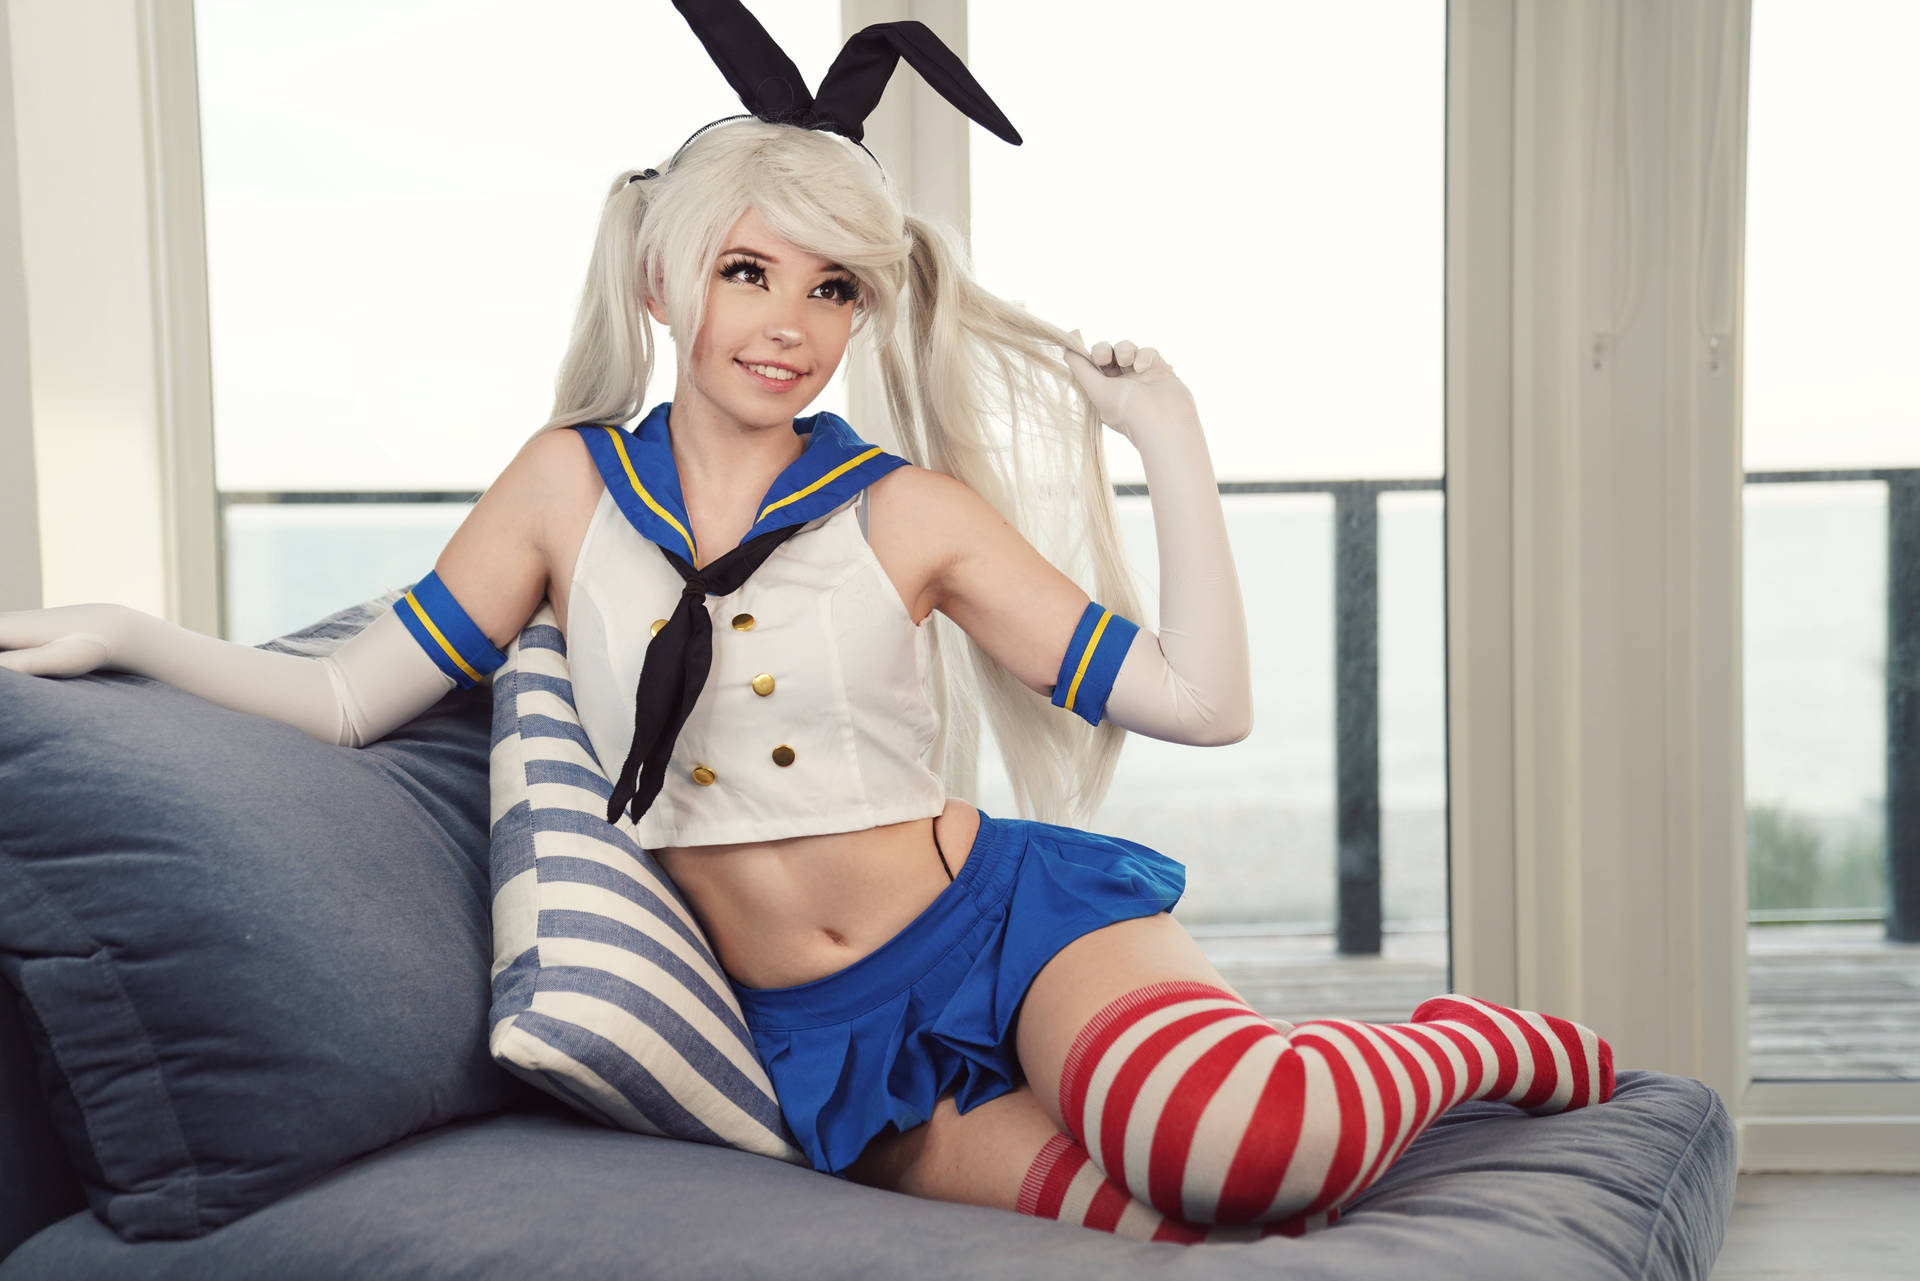 Exquisite Shimakaze Cosplay by elegant woman Wallpaper